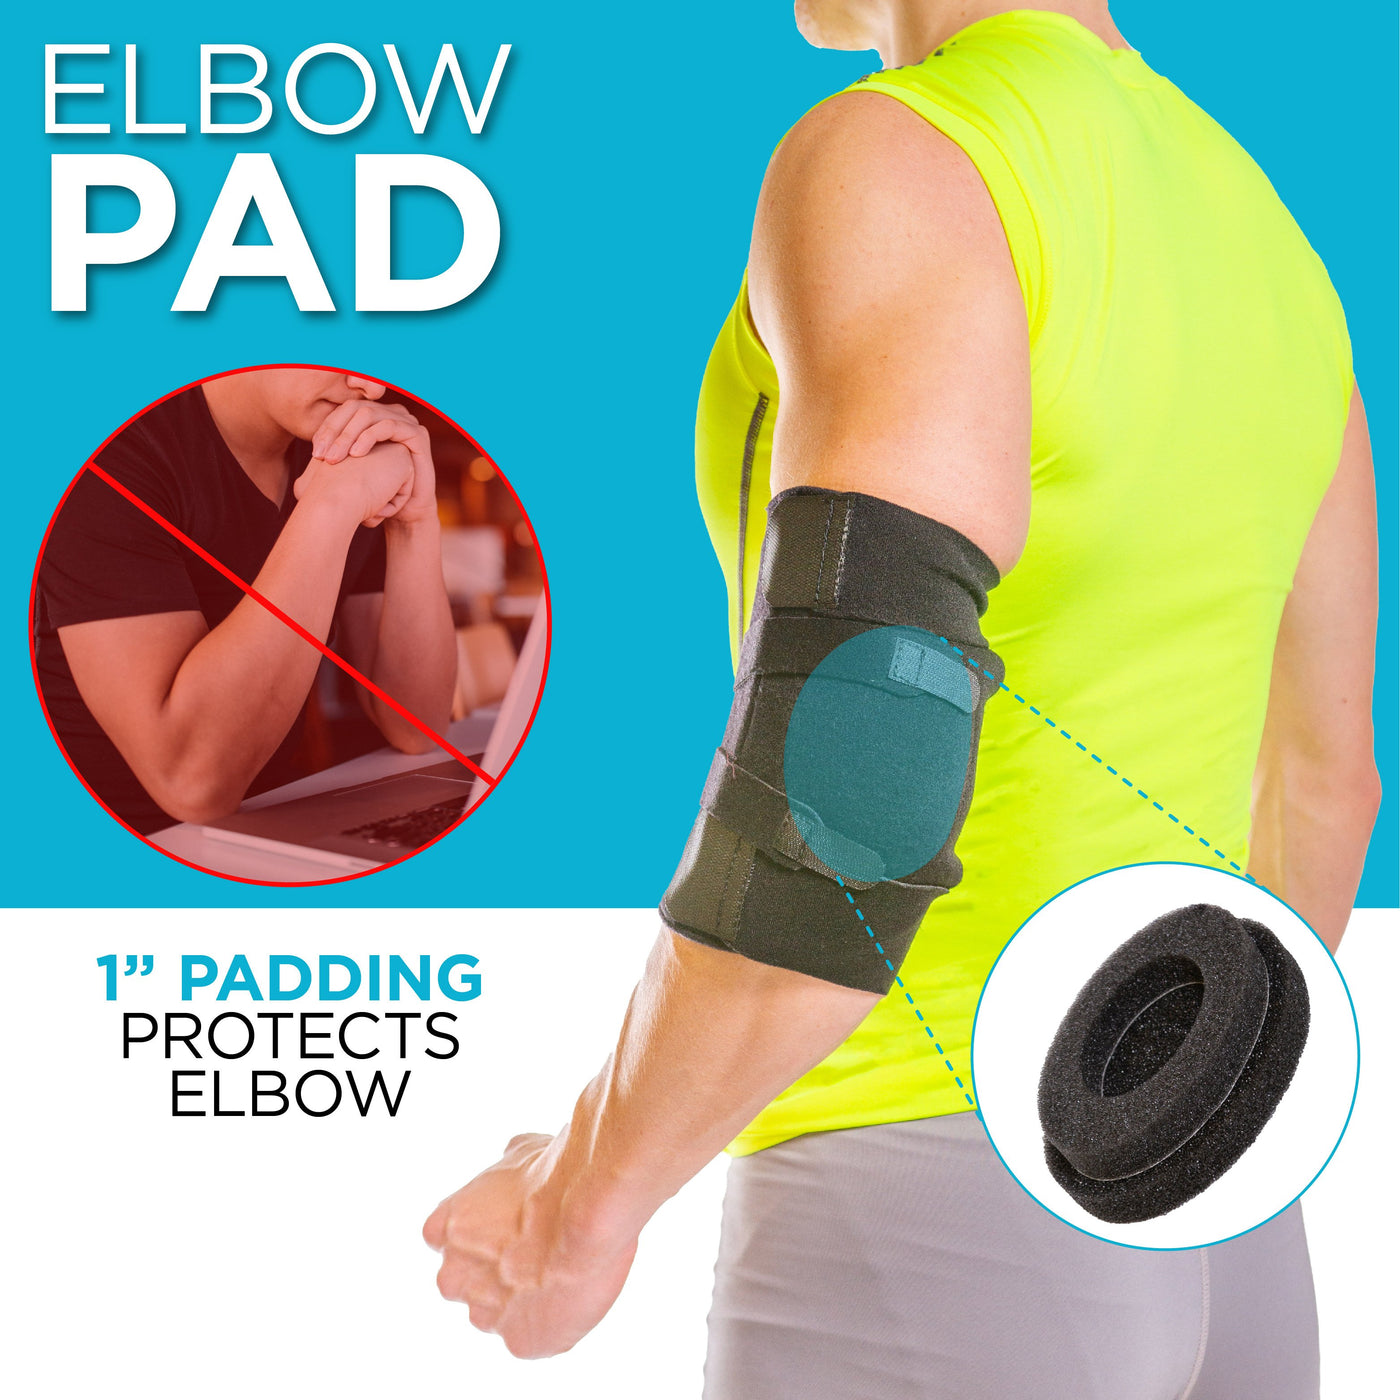 the ulnar nerve pad in our cubital tunnel syndrome brace helps prevent future injury by protecting the nerve